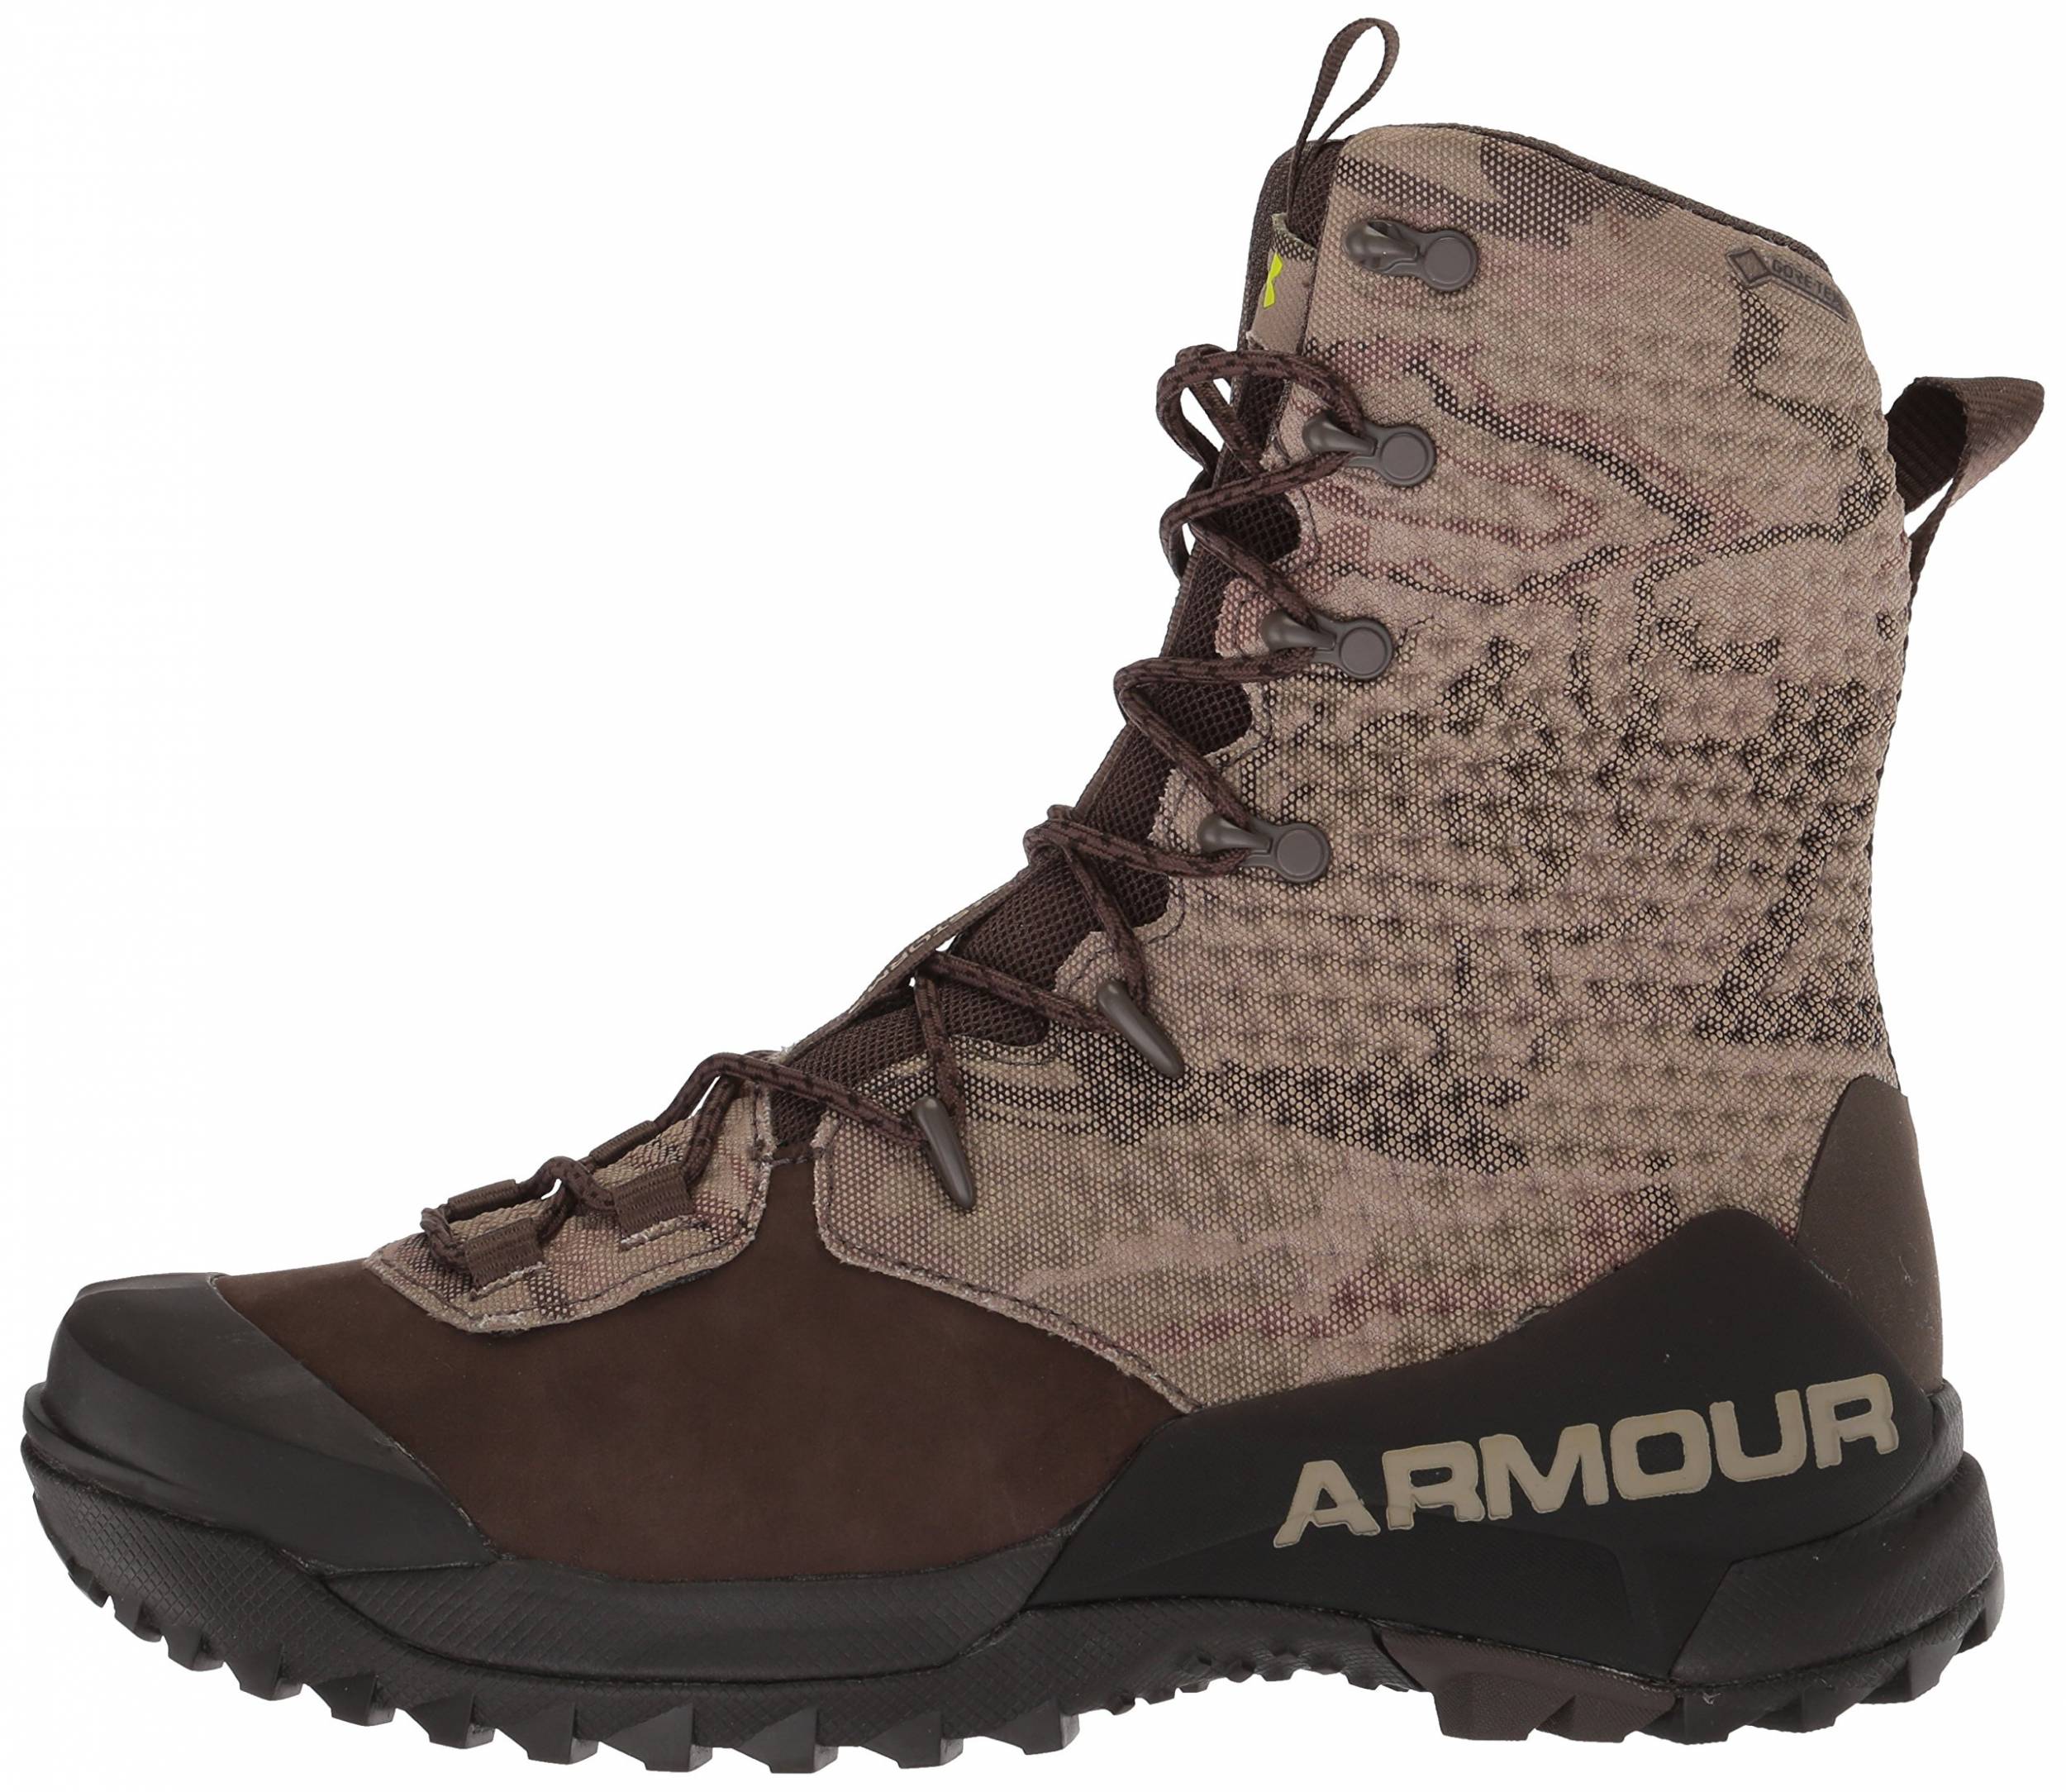 Under Armor Field Ops Boots